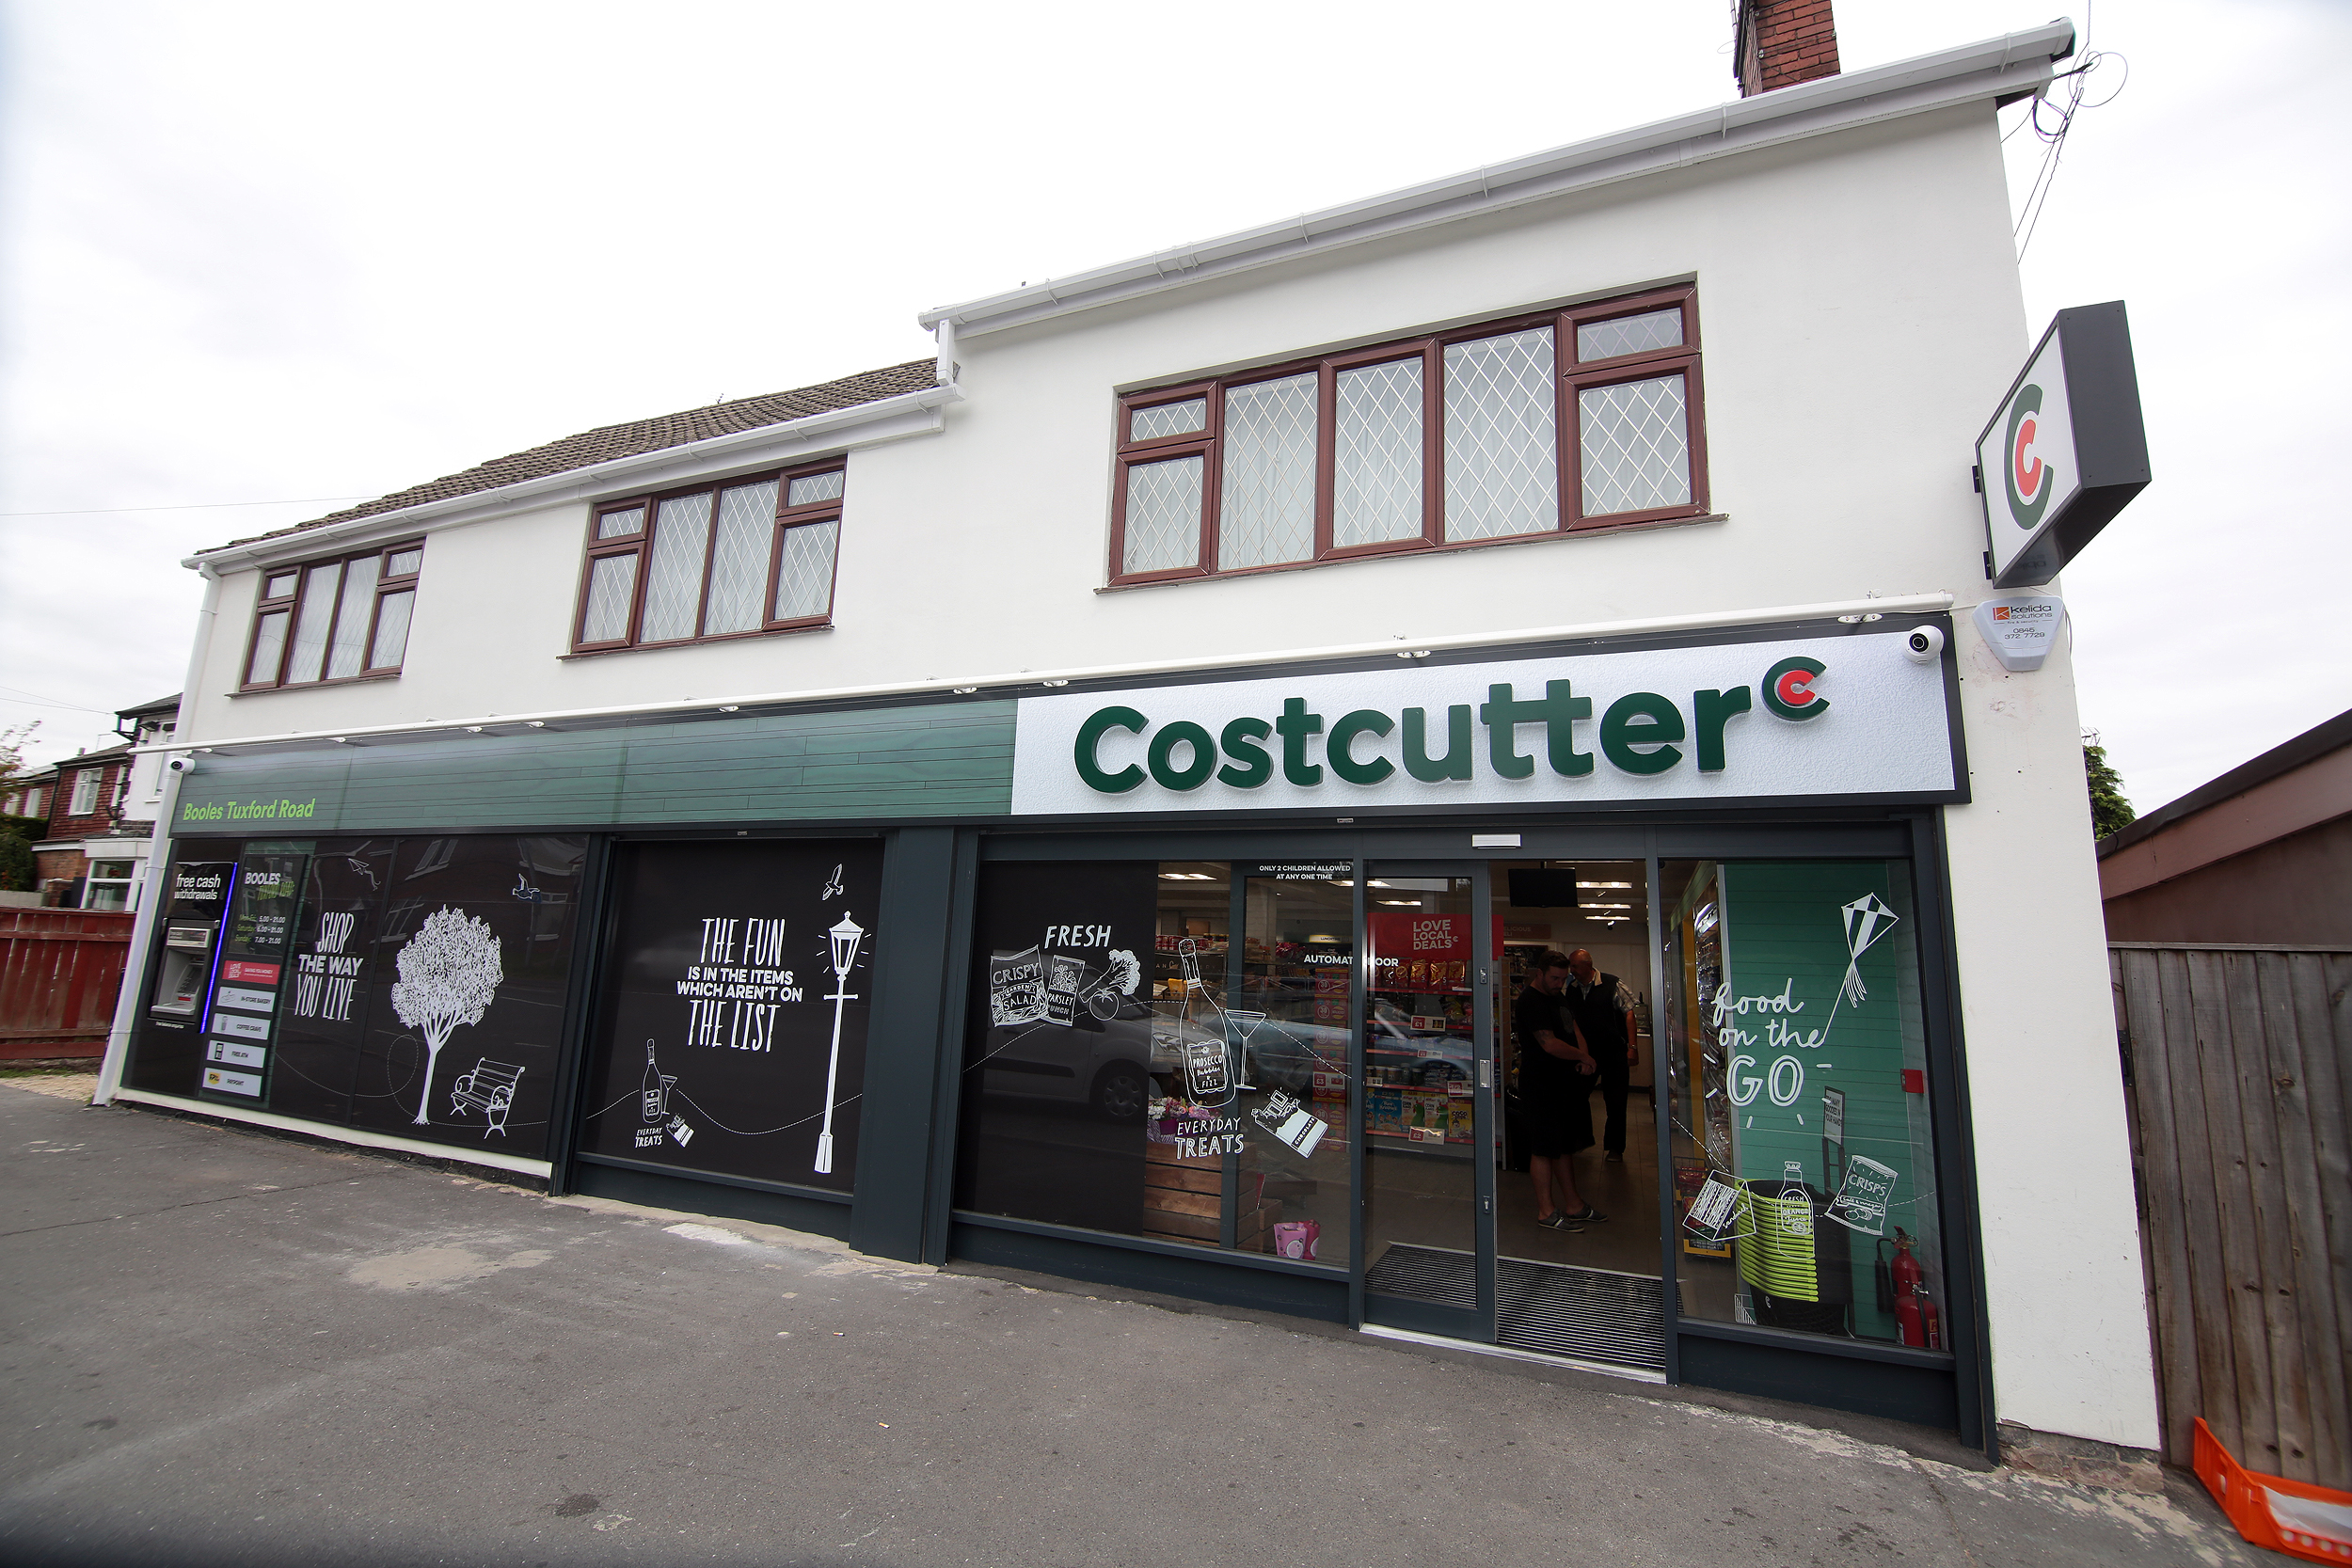 Costcutter announces partnership with predictive analytics experts